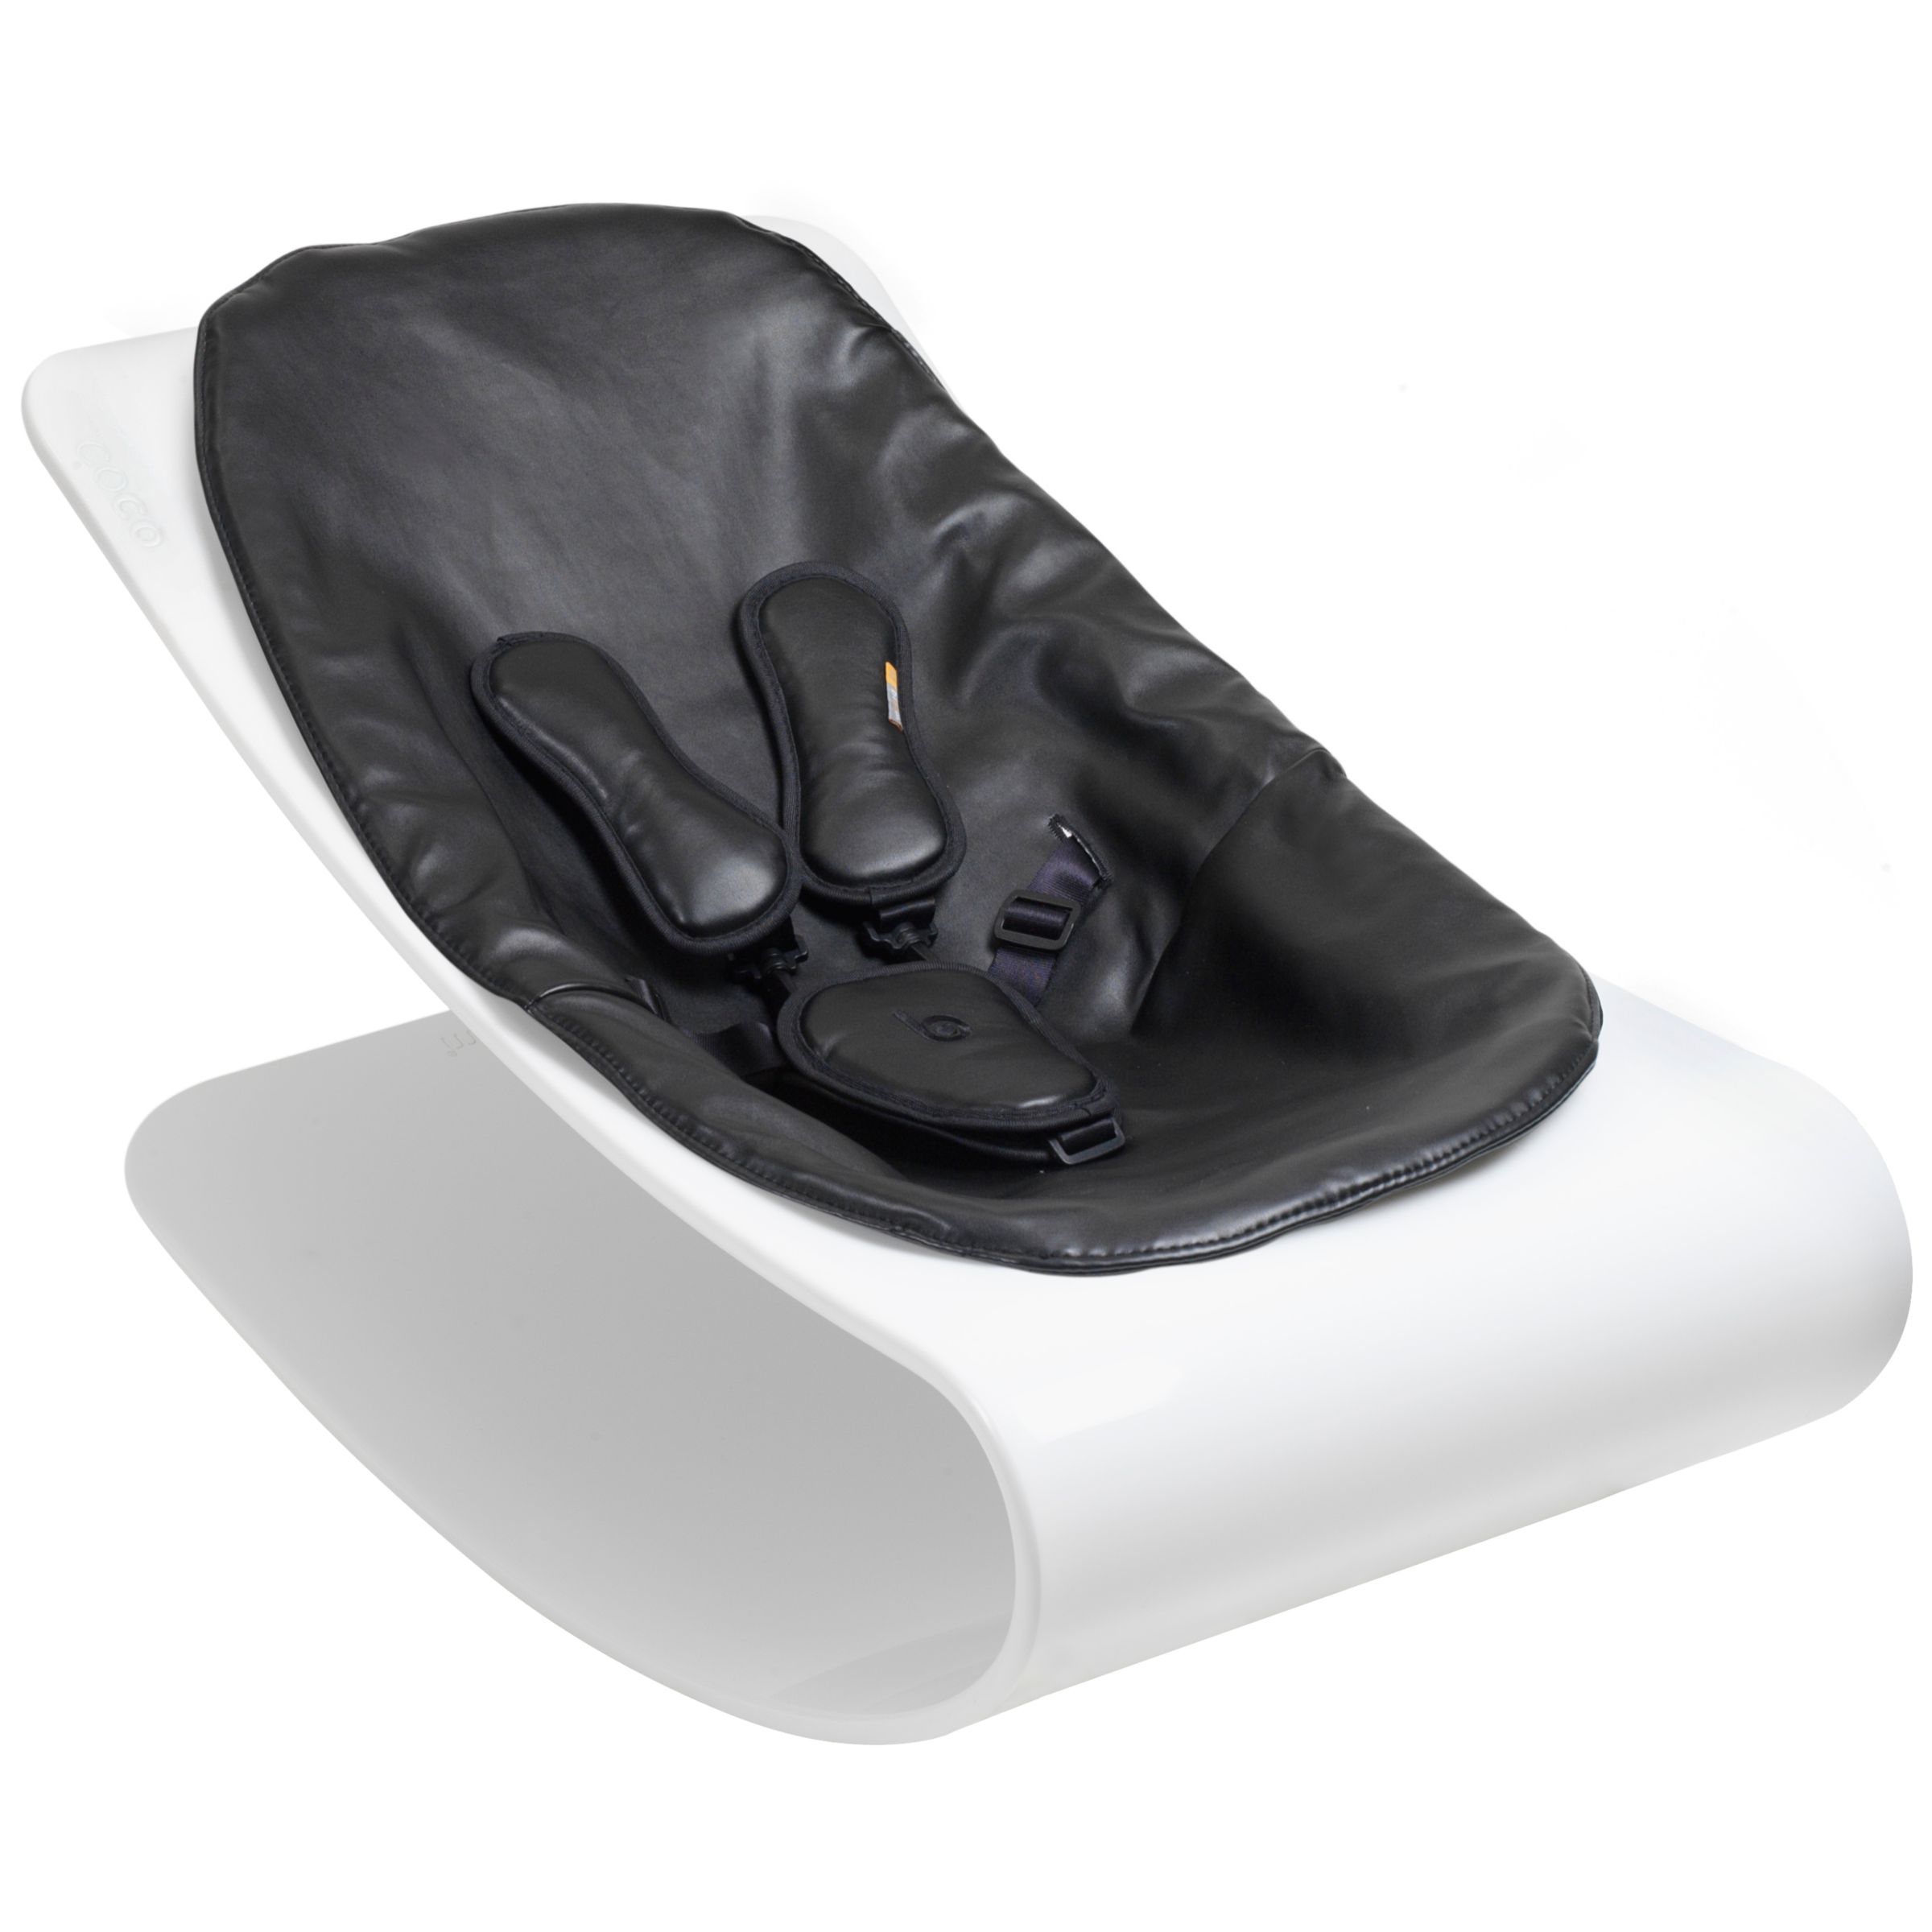 bloom Coco Plexistyle Baby Lounger, Ivory White with Midnight Black at JohnLewis